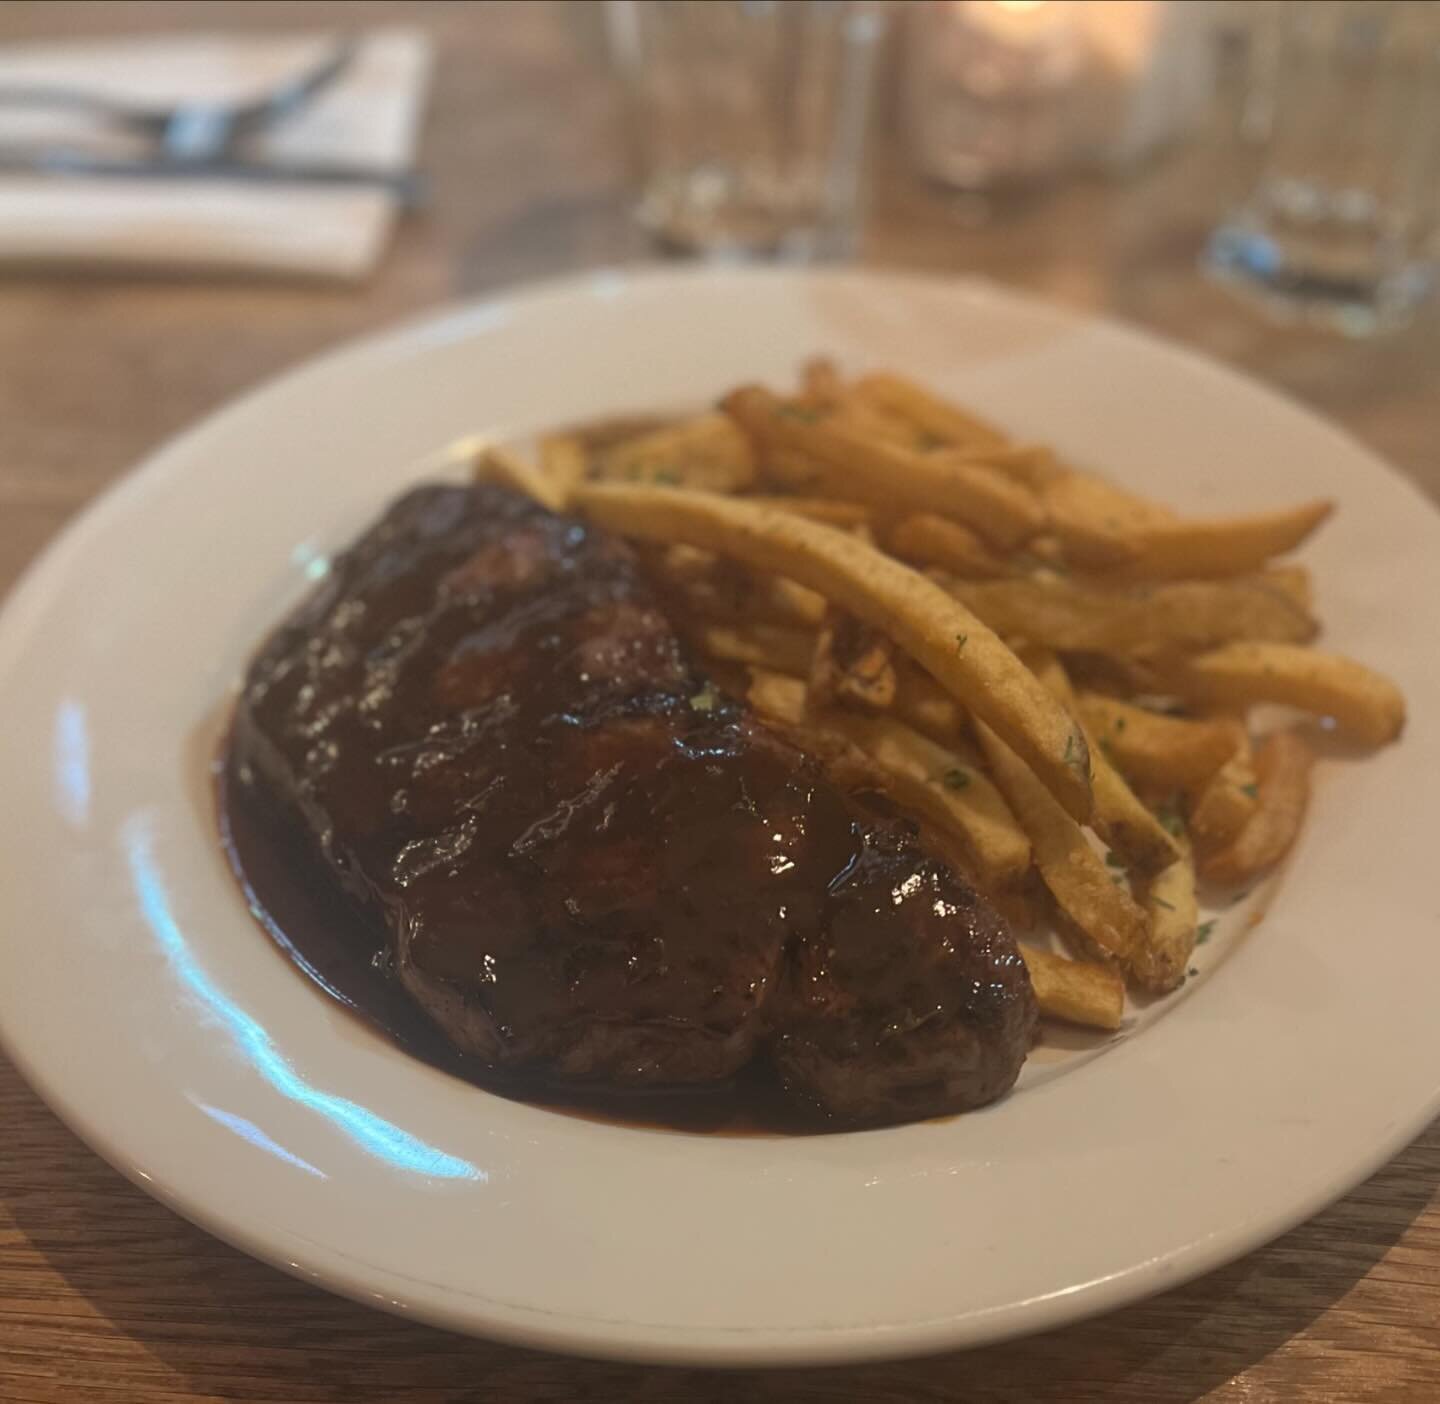 Our steak frites special -
An all-time classic for $20.
Served every Wednesday and Thursday night at Miss Lucy's Kitchen.